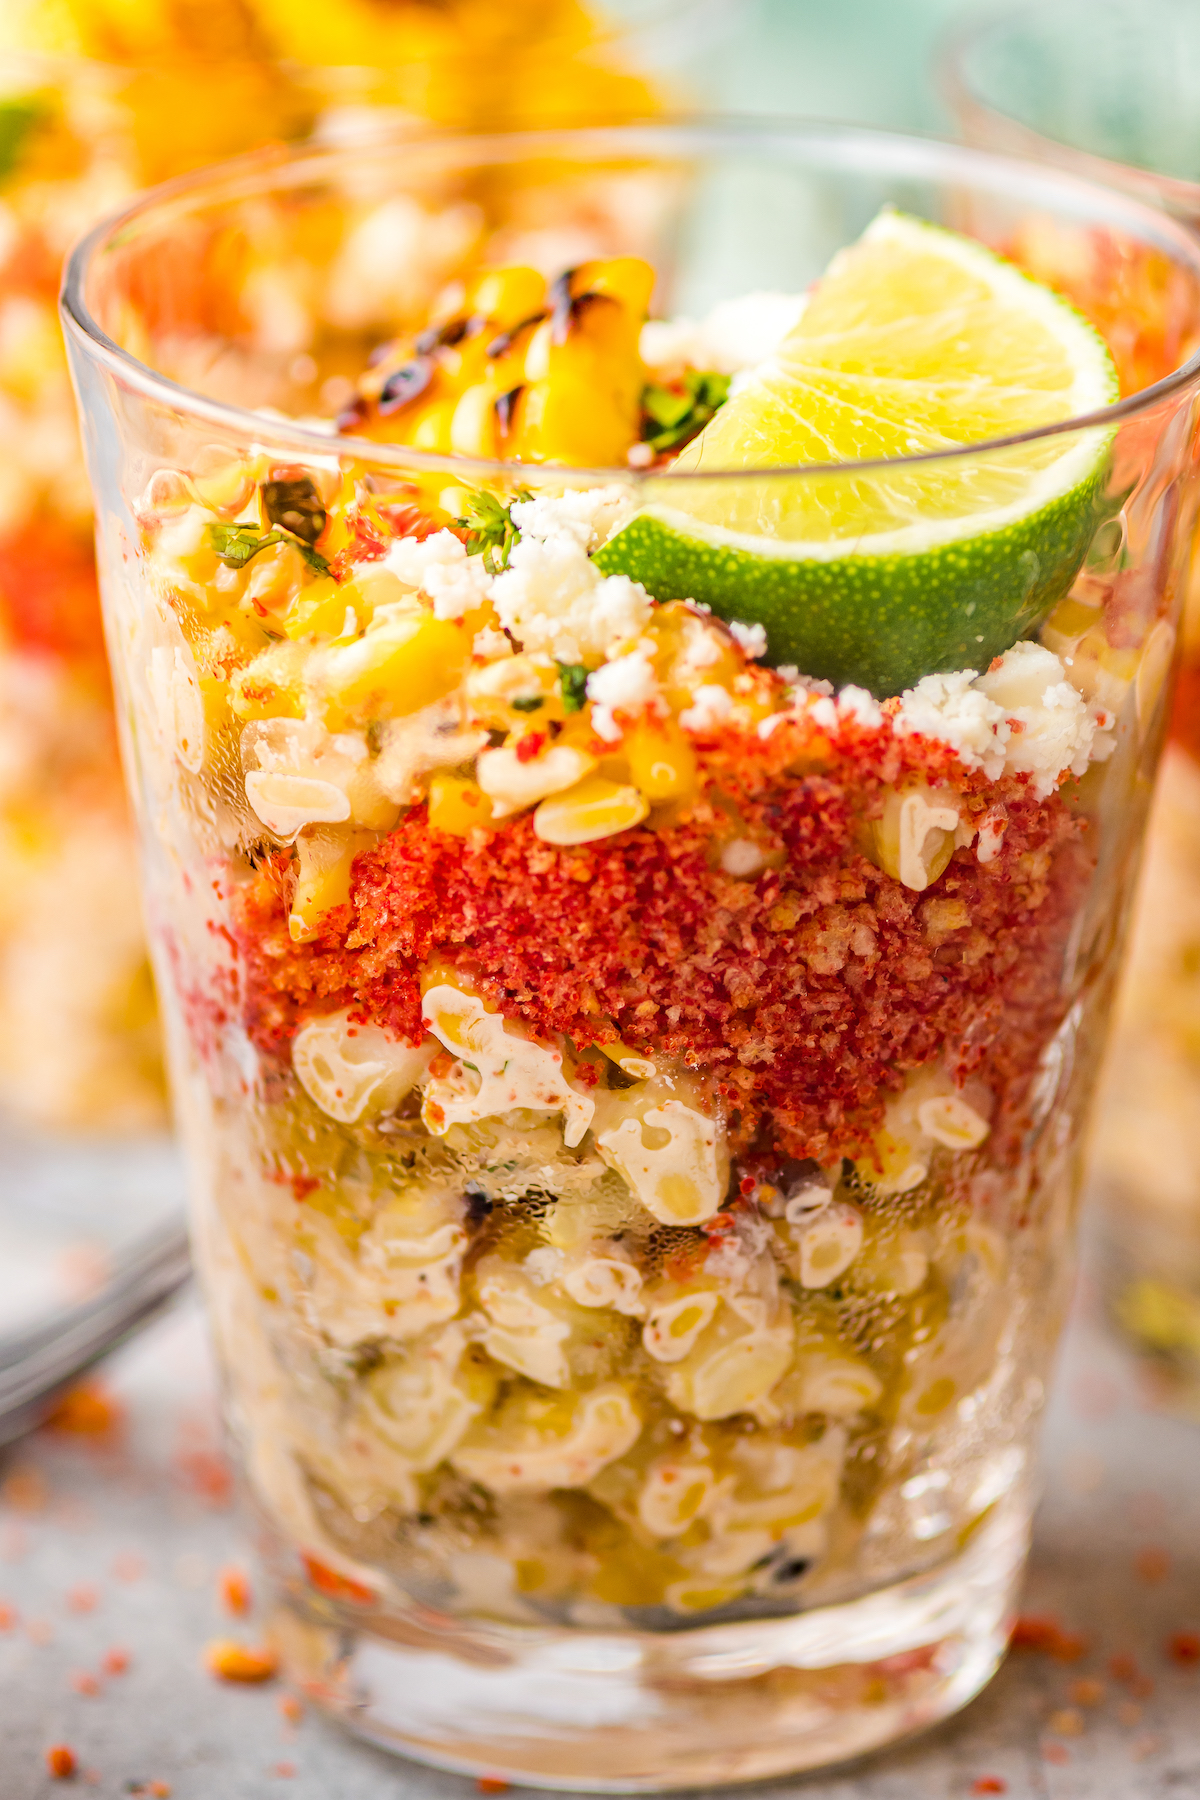 Side view of Mexican corn salad in a cup, showing the layers of corn, crushed hot Cheetos, and other toppings.